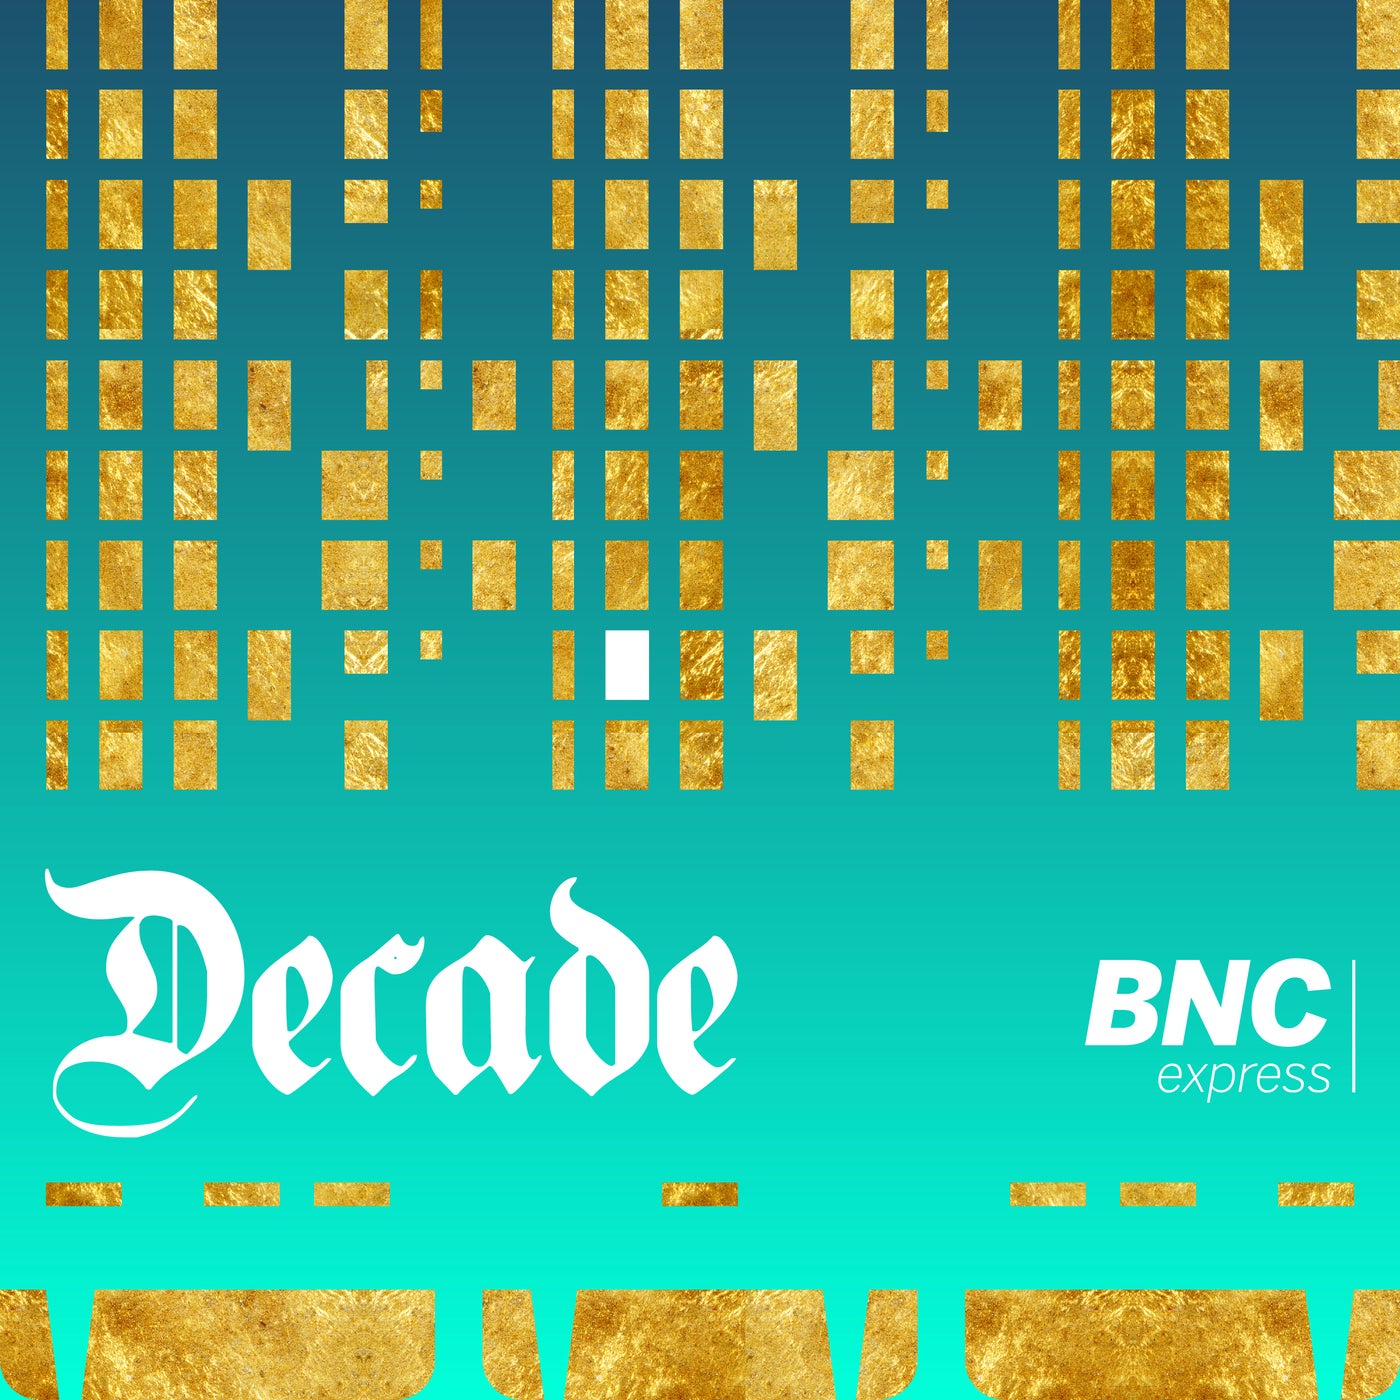 Decade - 10 years of BNCexpress